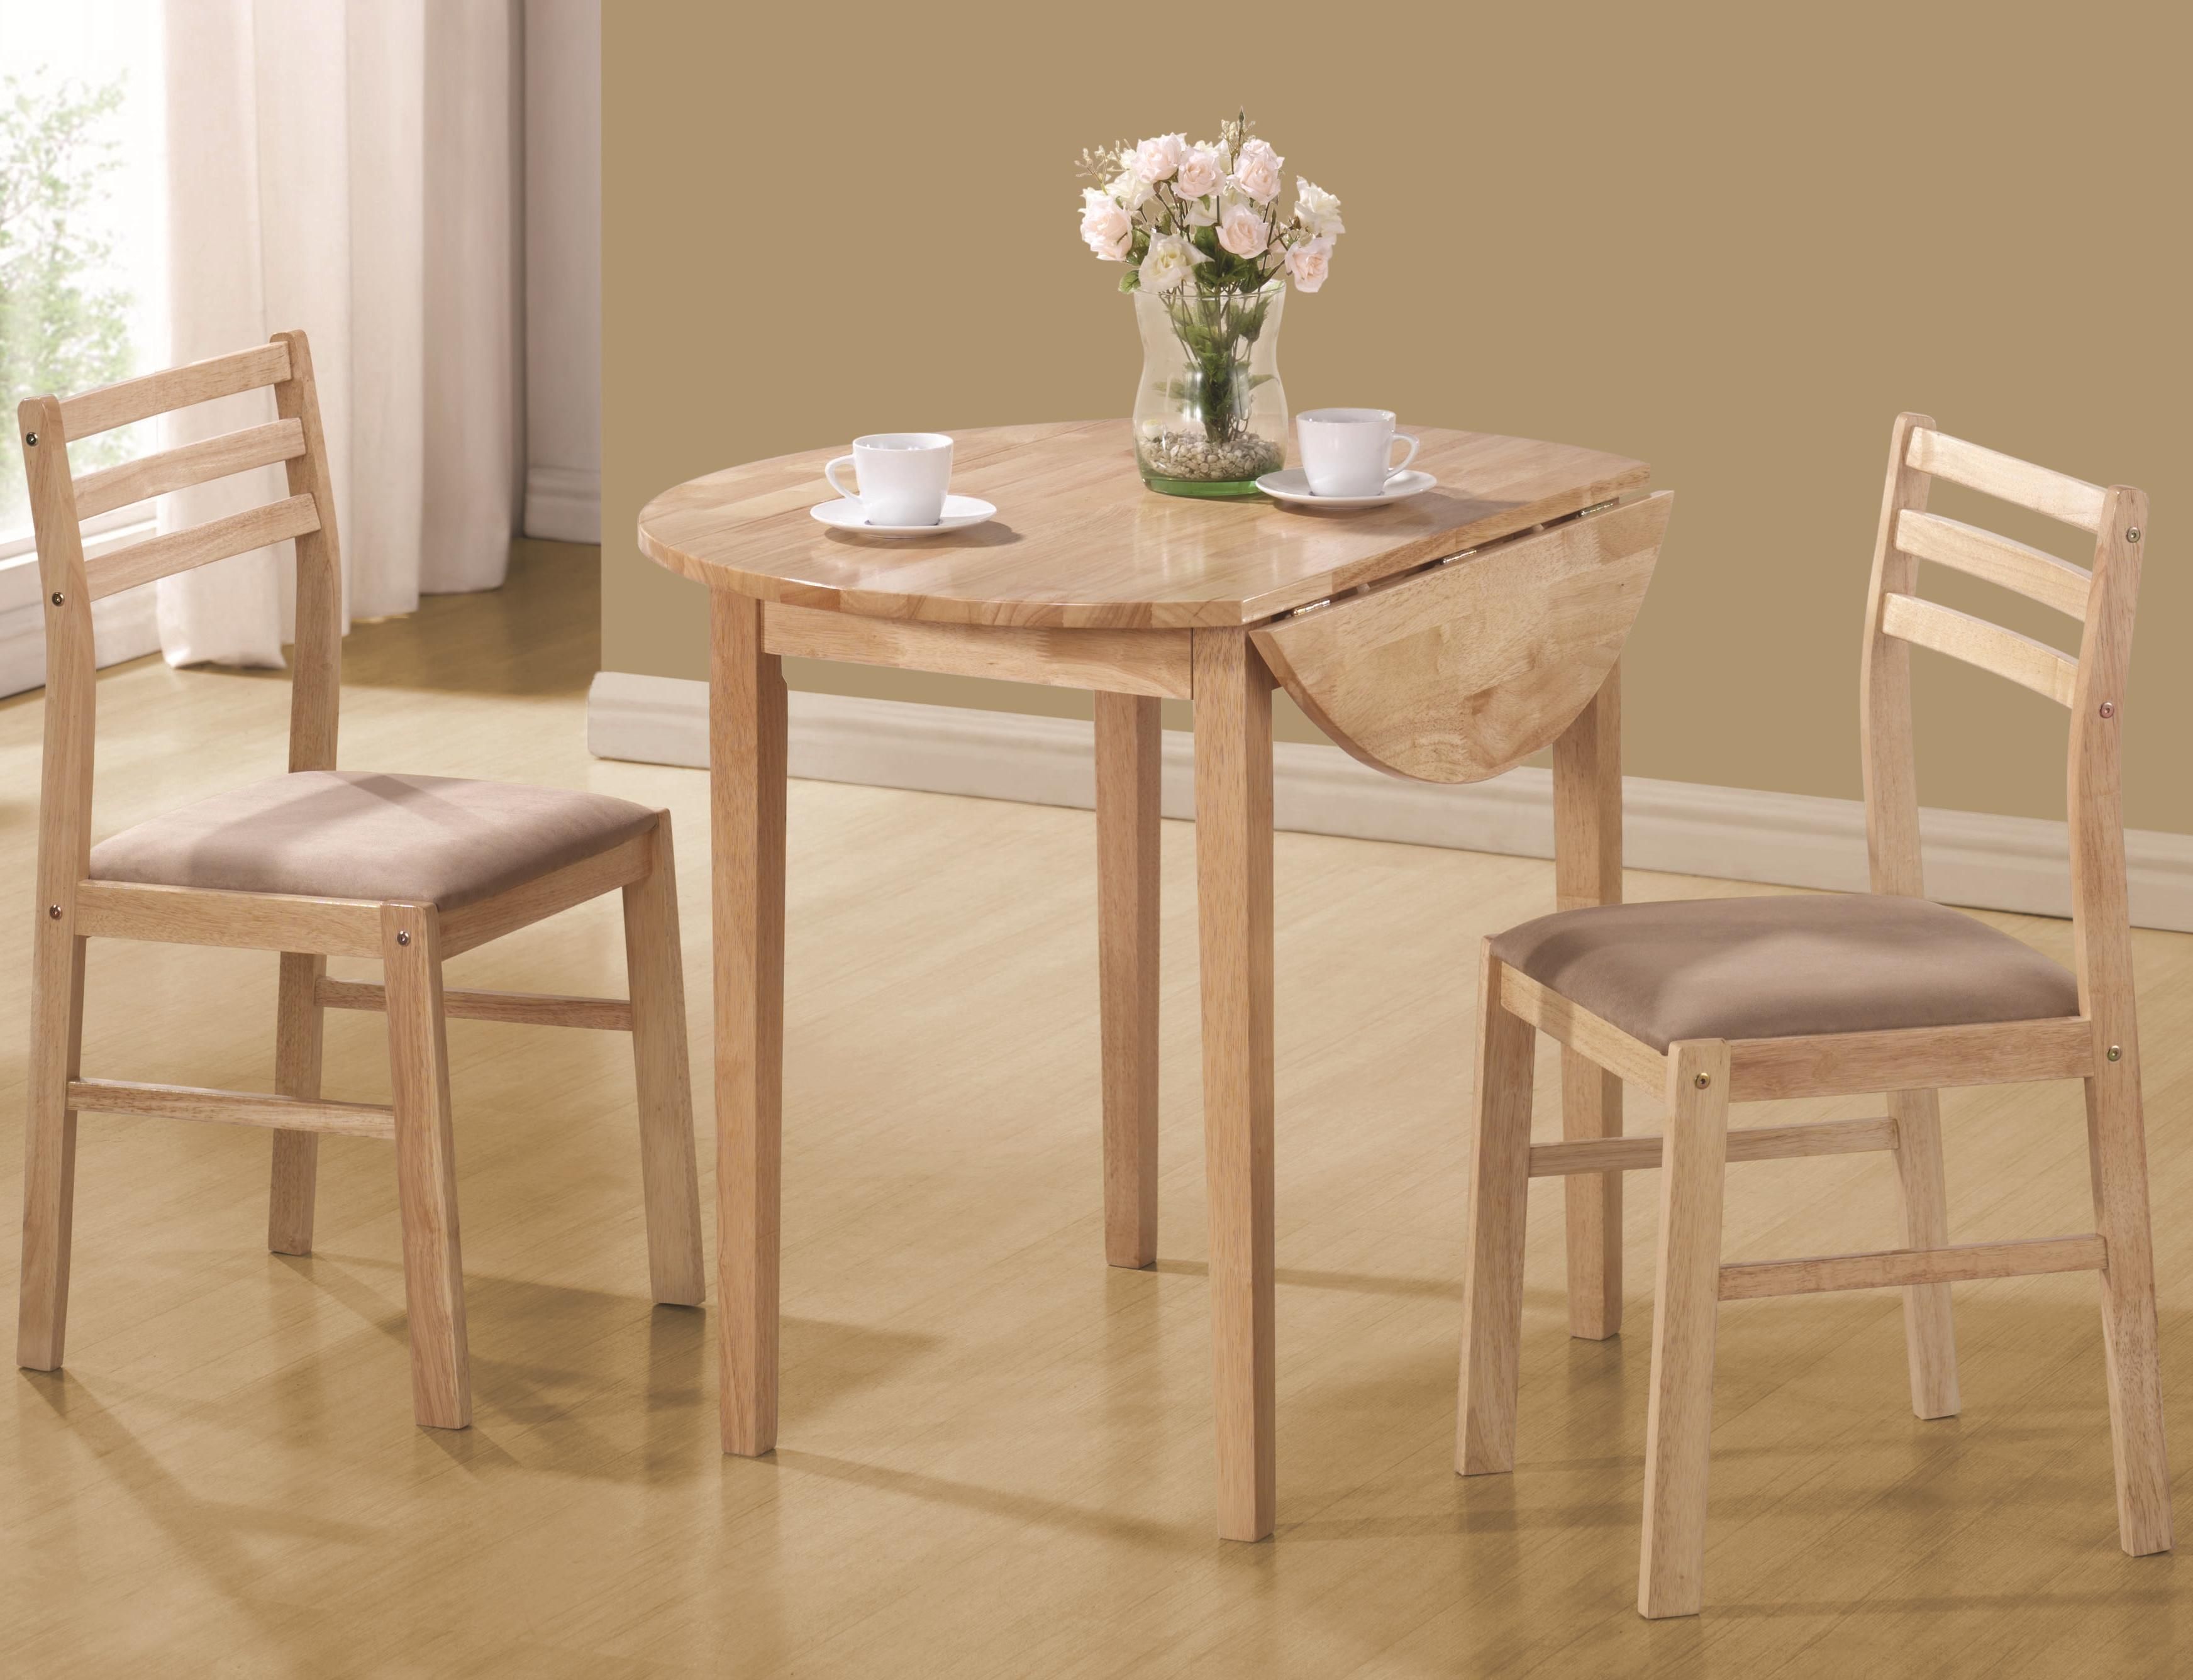 Dinettes Casual 3 Piece Table & Chair Setcoaster At Value City Furniture Within Newest 3 Piece Dining Sets (Photo 35477 of 35622)